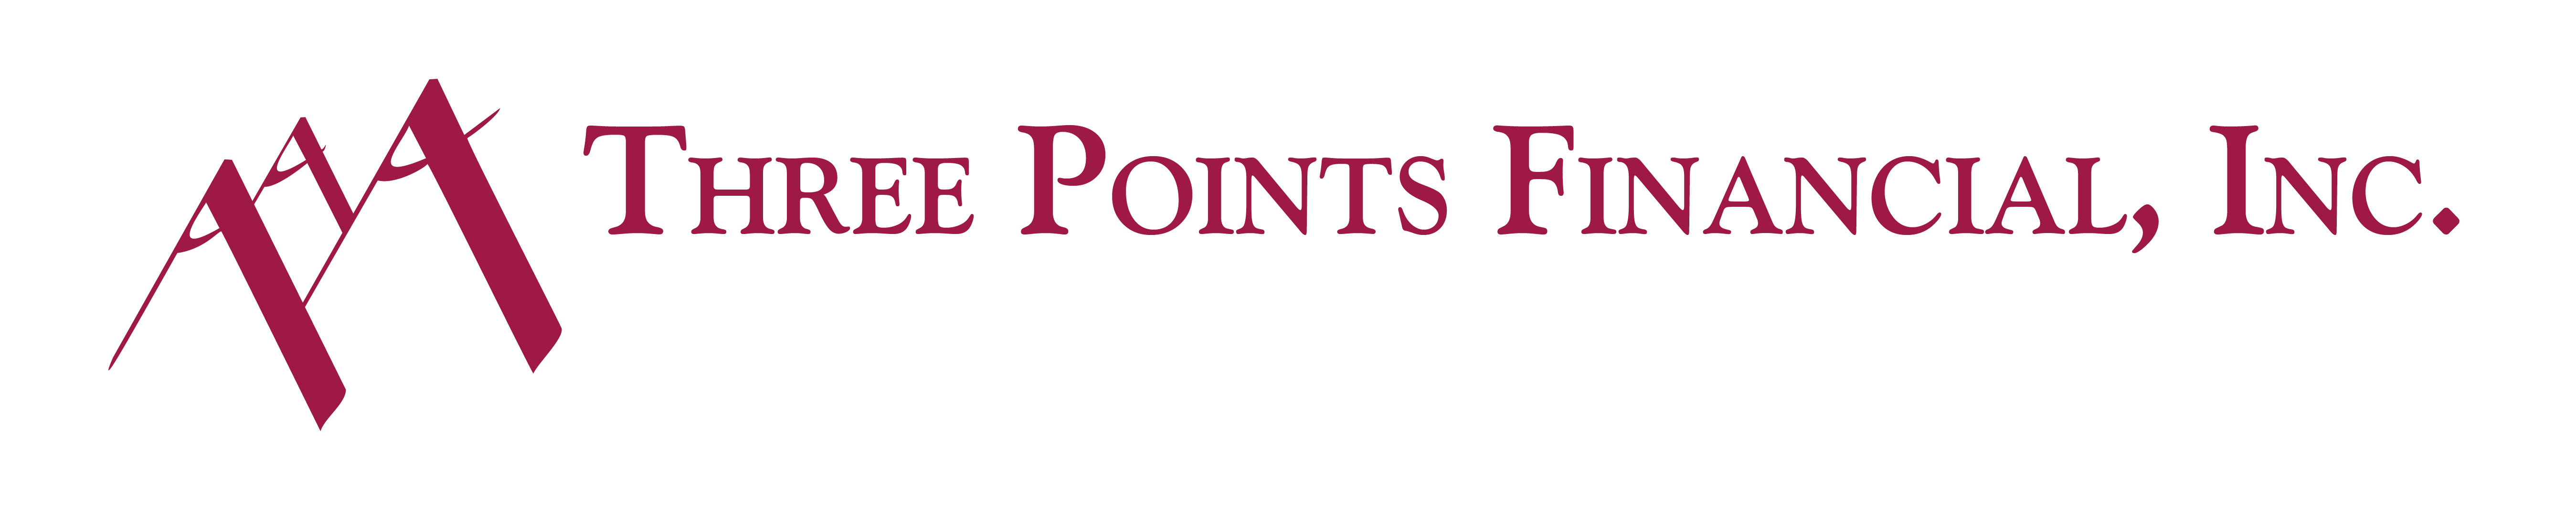 Three Points Financial